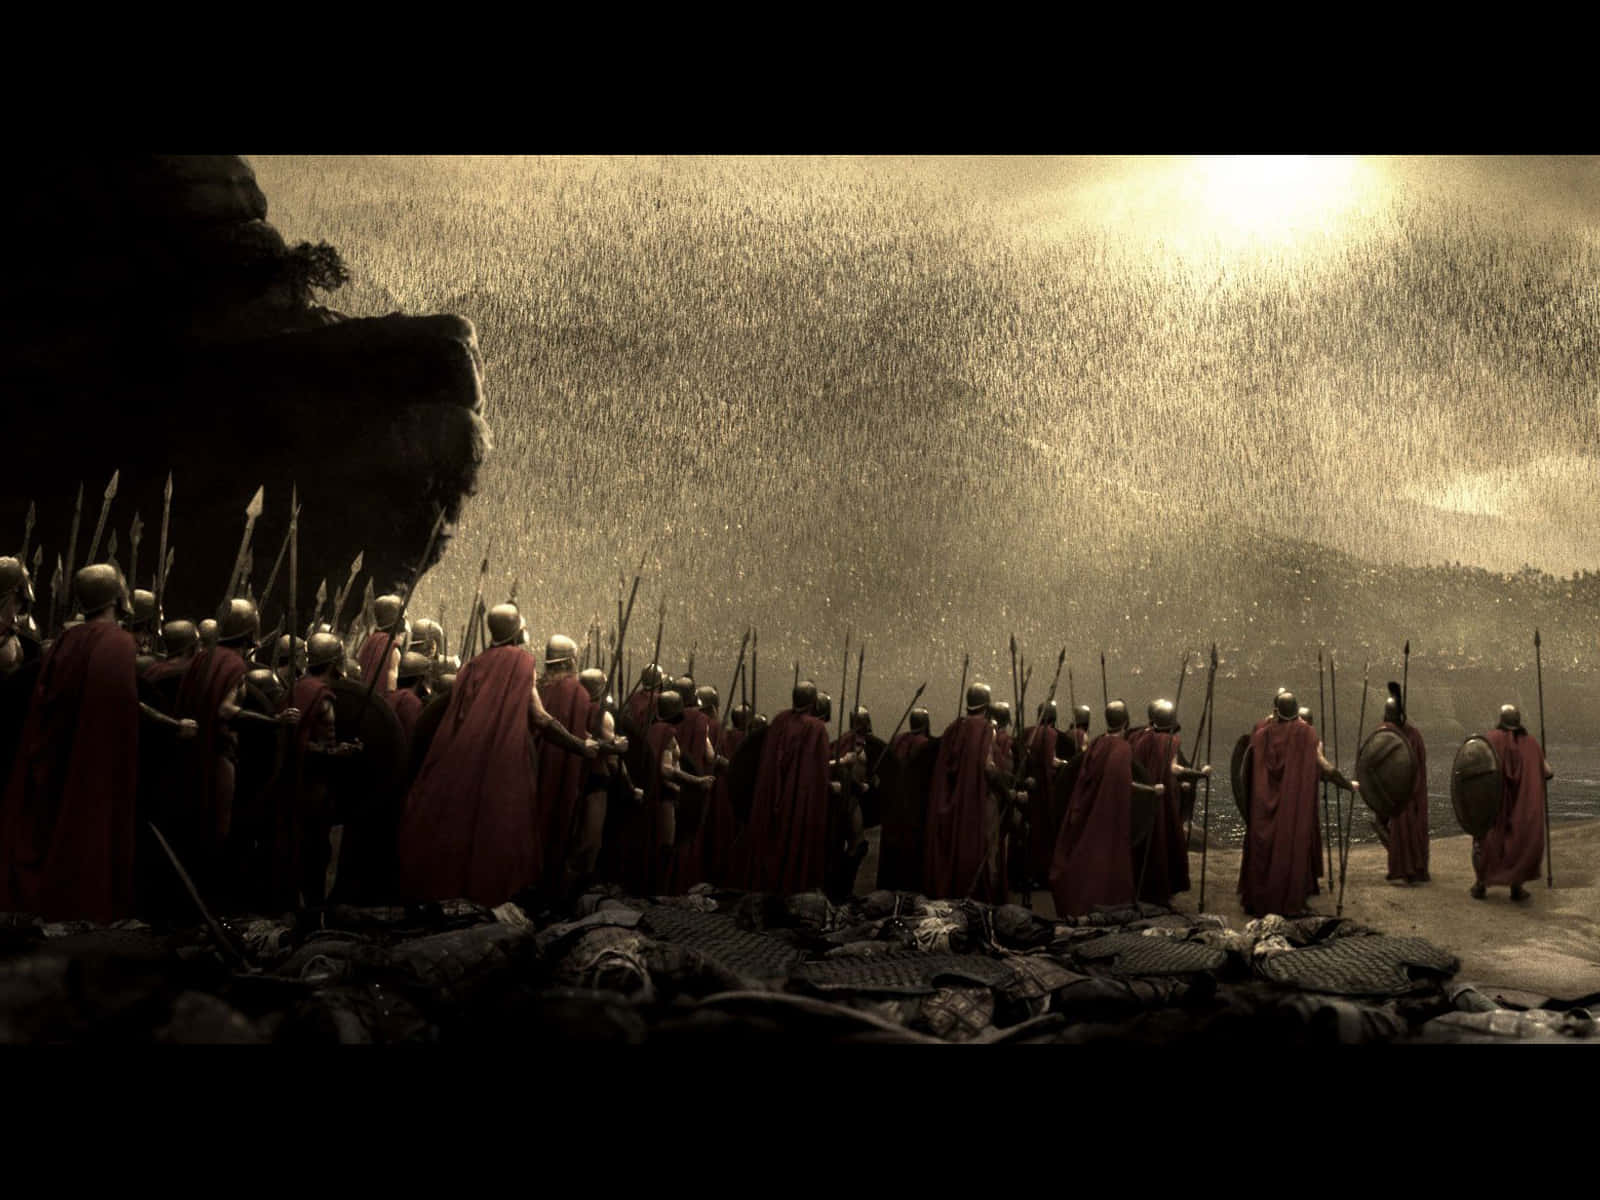 Warriors With Red Capes From The 300 Movie Wallpaper